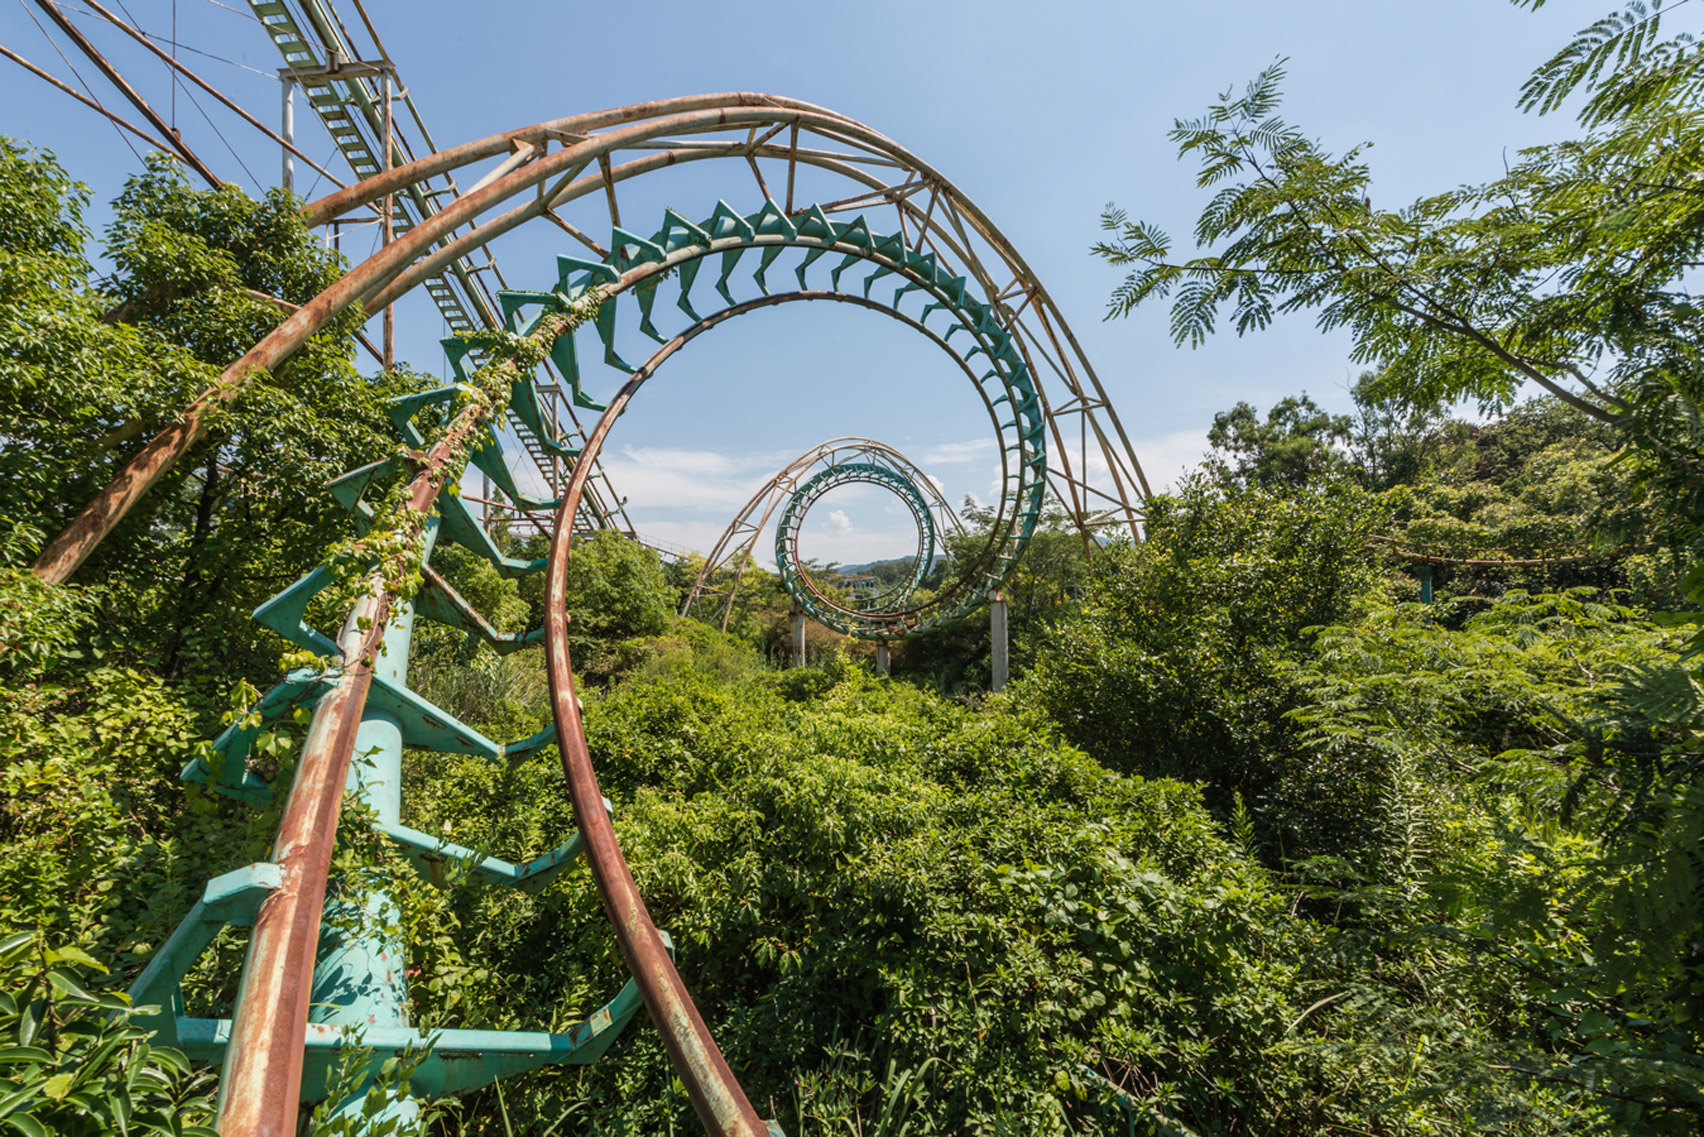 Deserted Japanese theme park photographed just before demolition